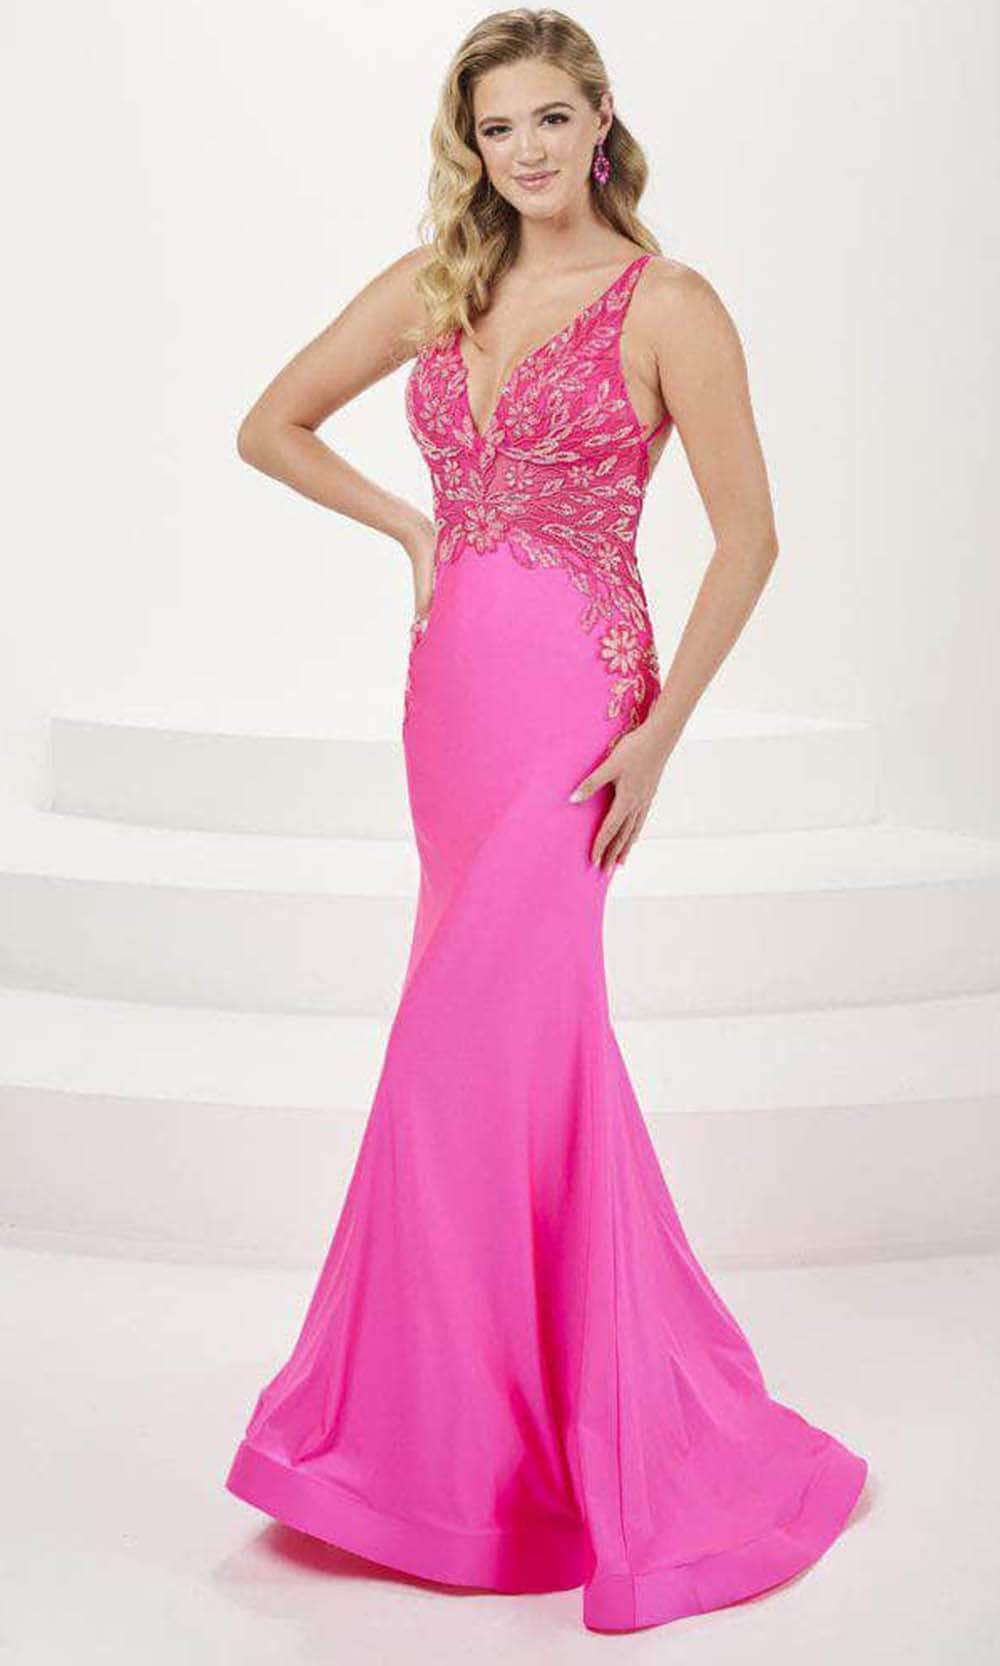 Tiffany Designs 16091 - V-Neck Floral Lace Evening Gown Evening Dresses 0 / Bright Pink